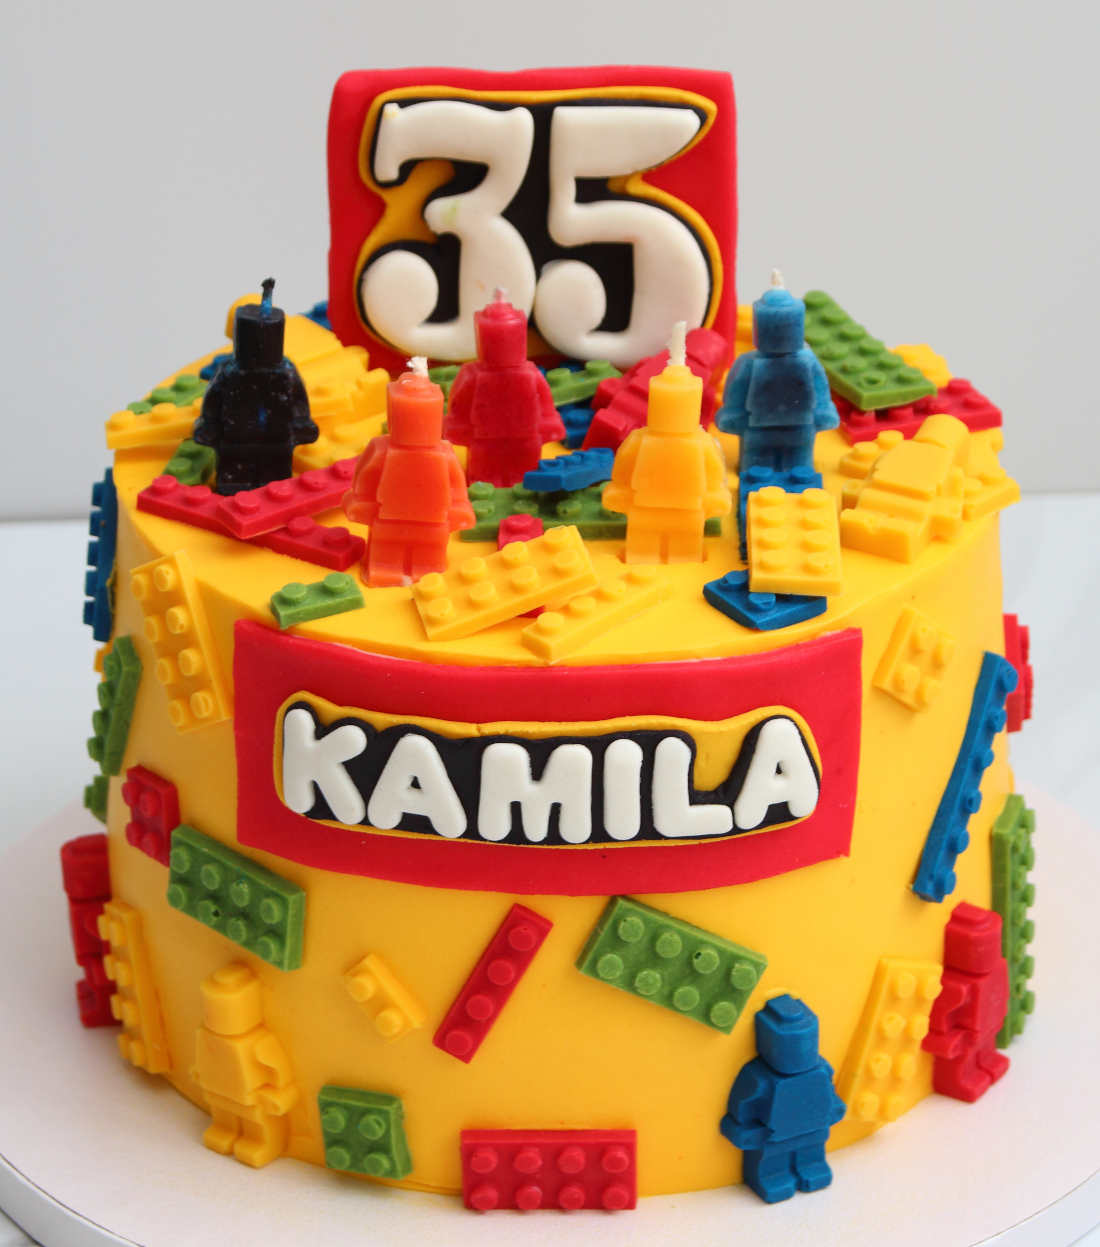 Lego constructor cake for 35 years